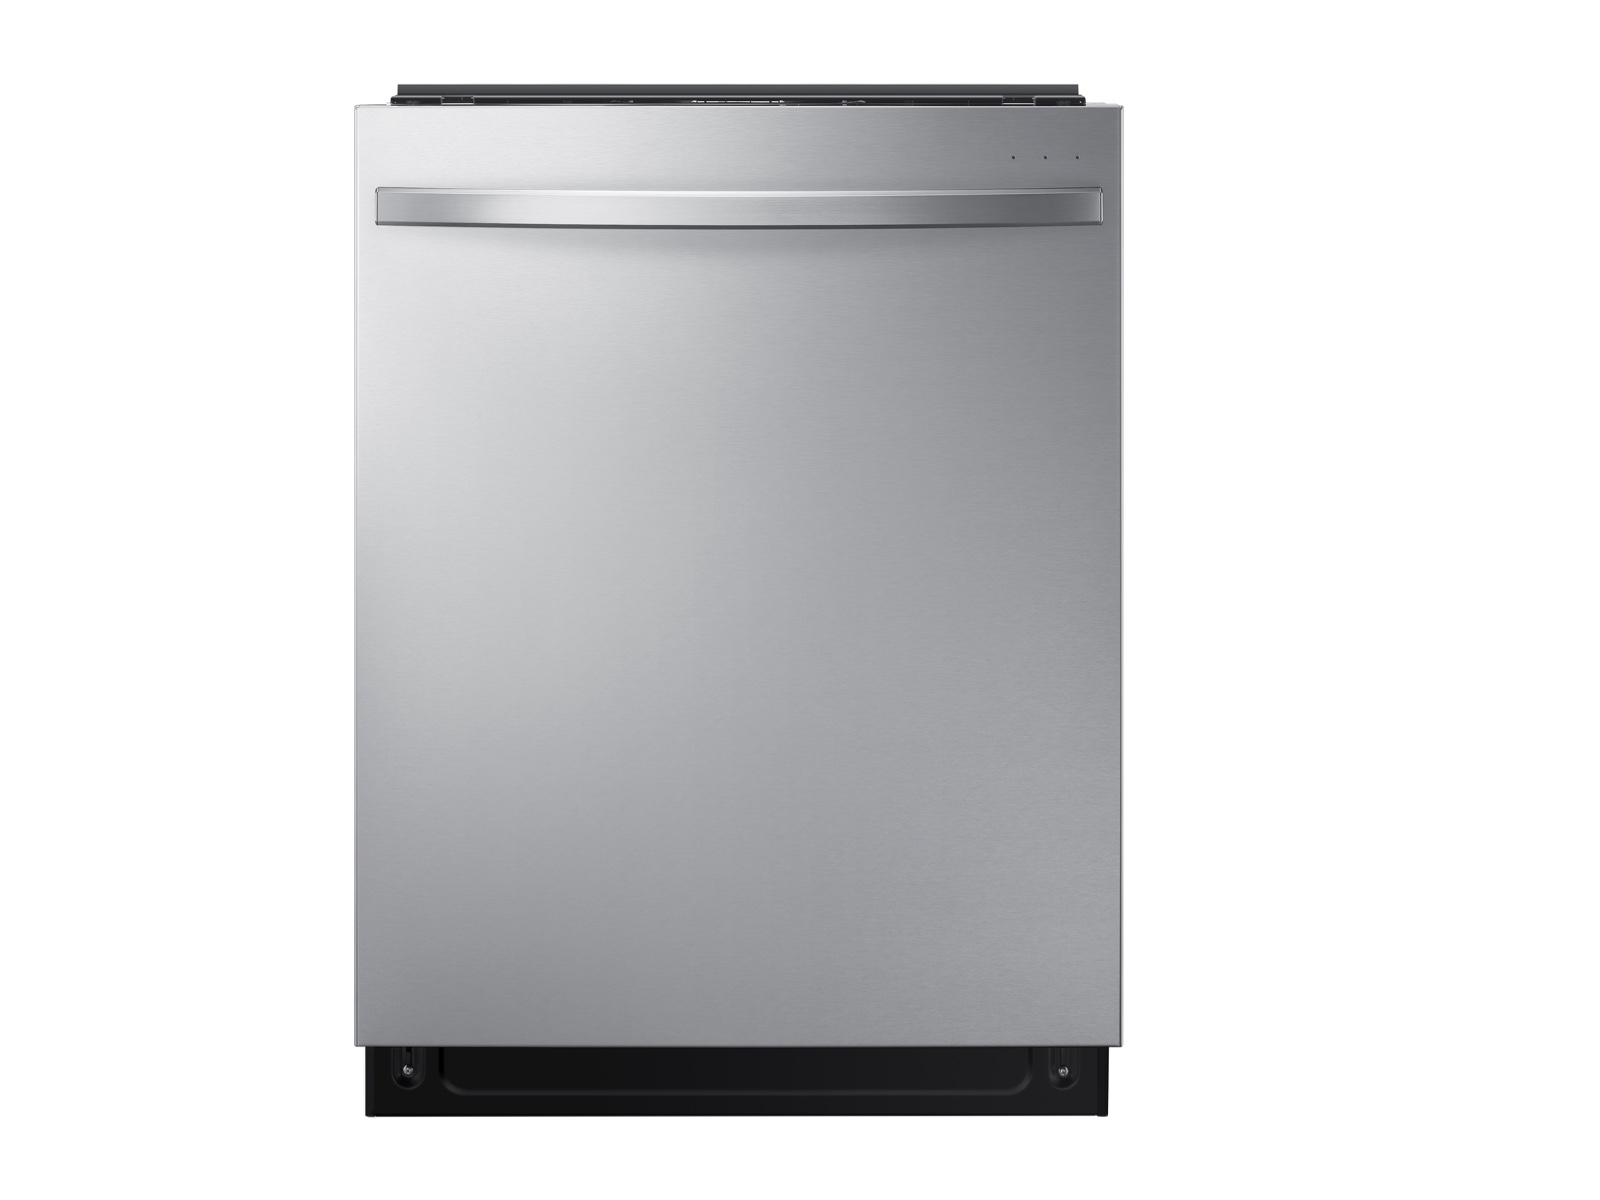 best price on stainless steel dishwashers